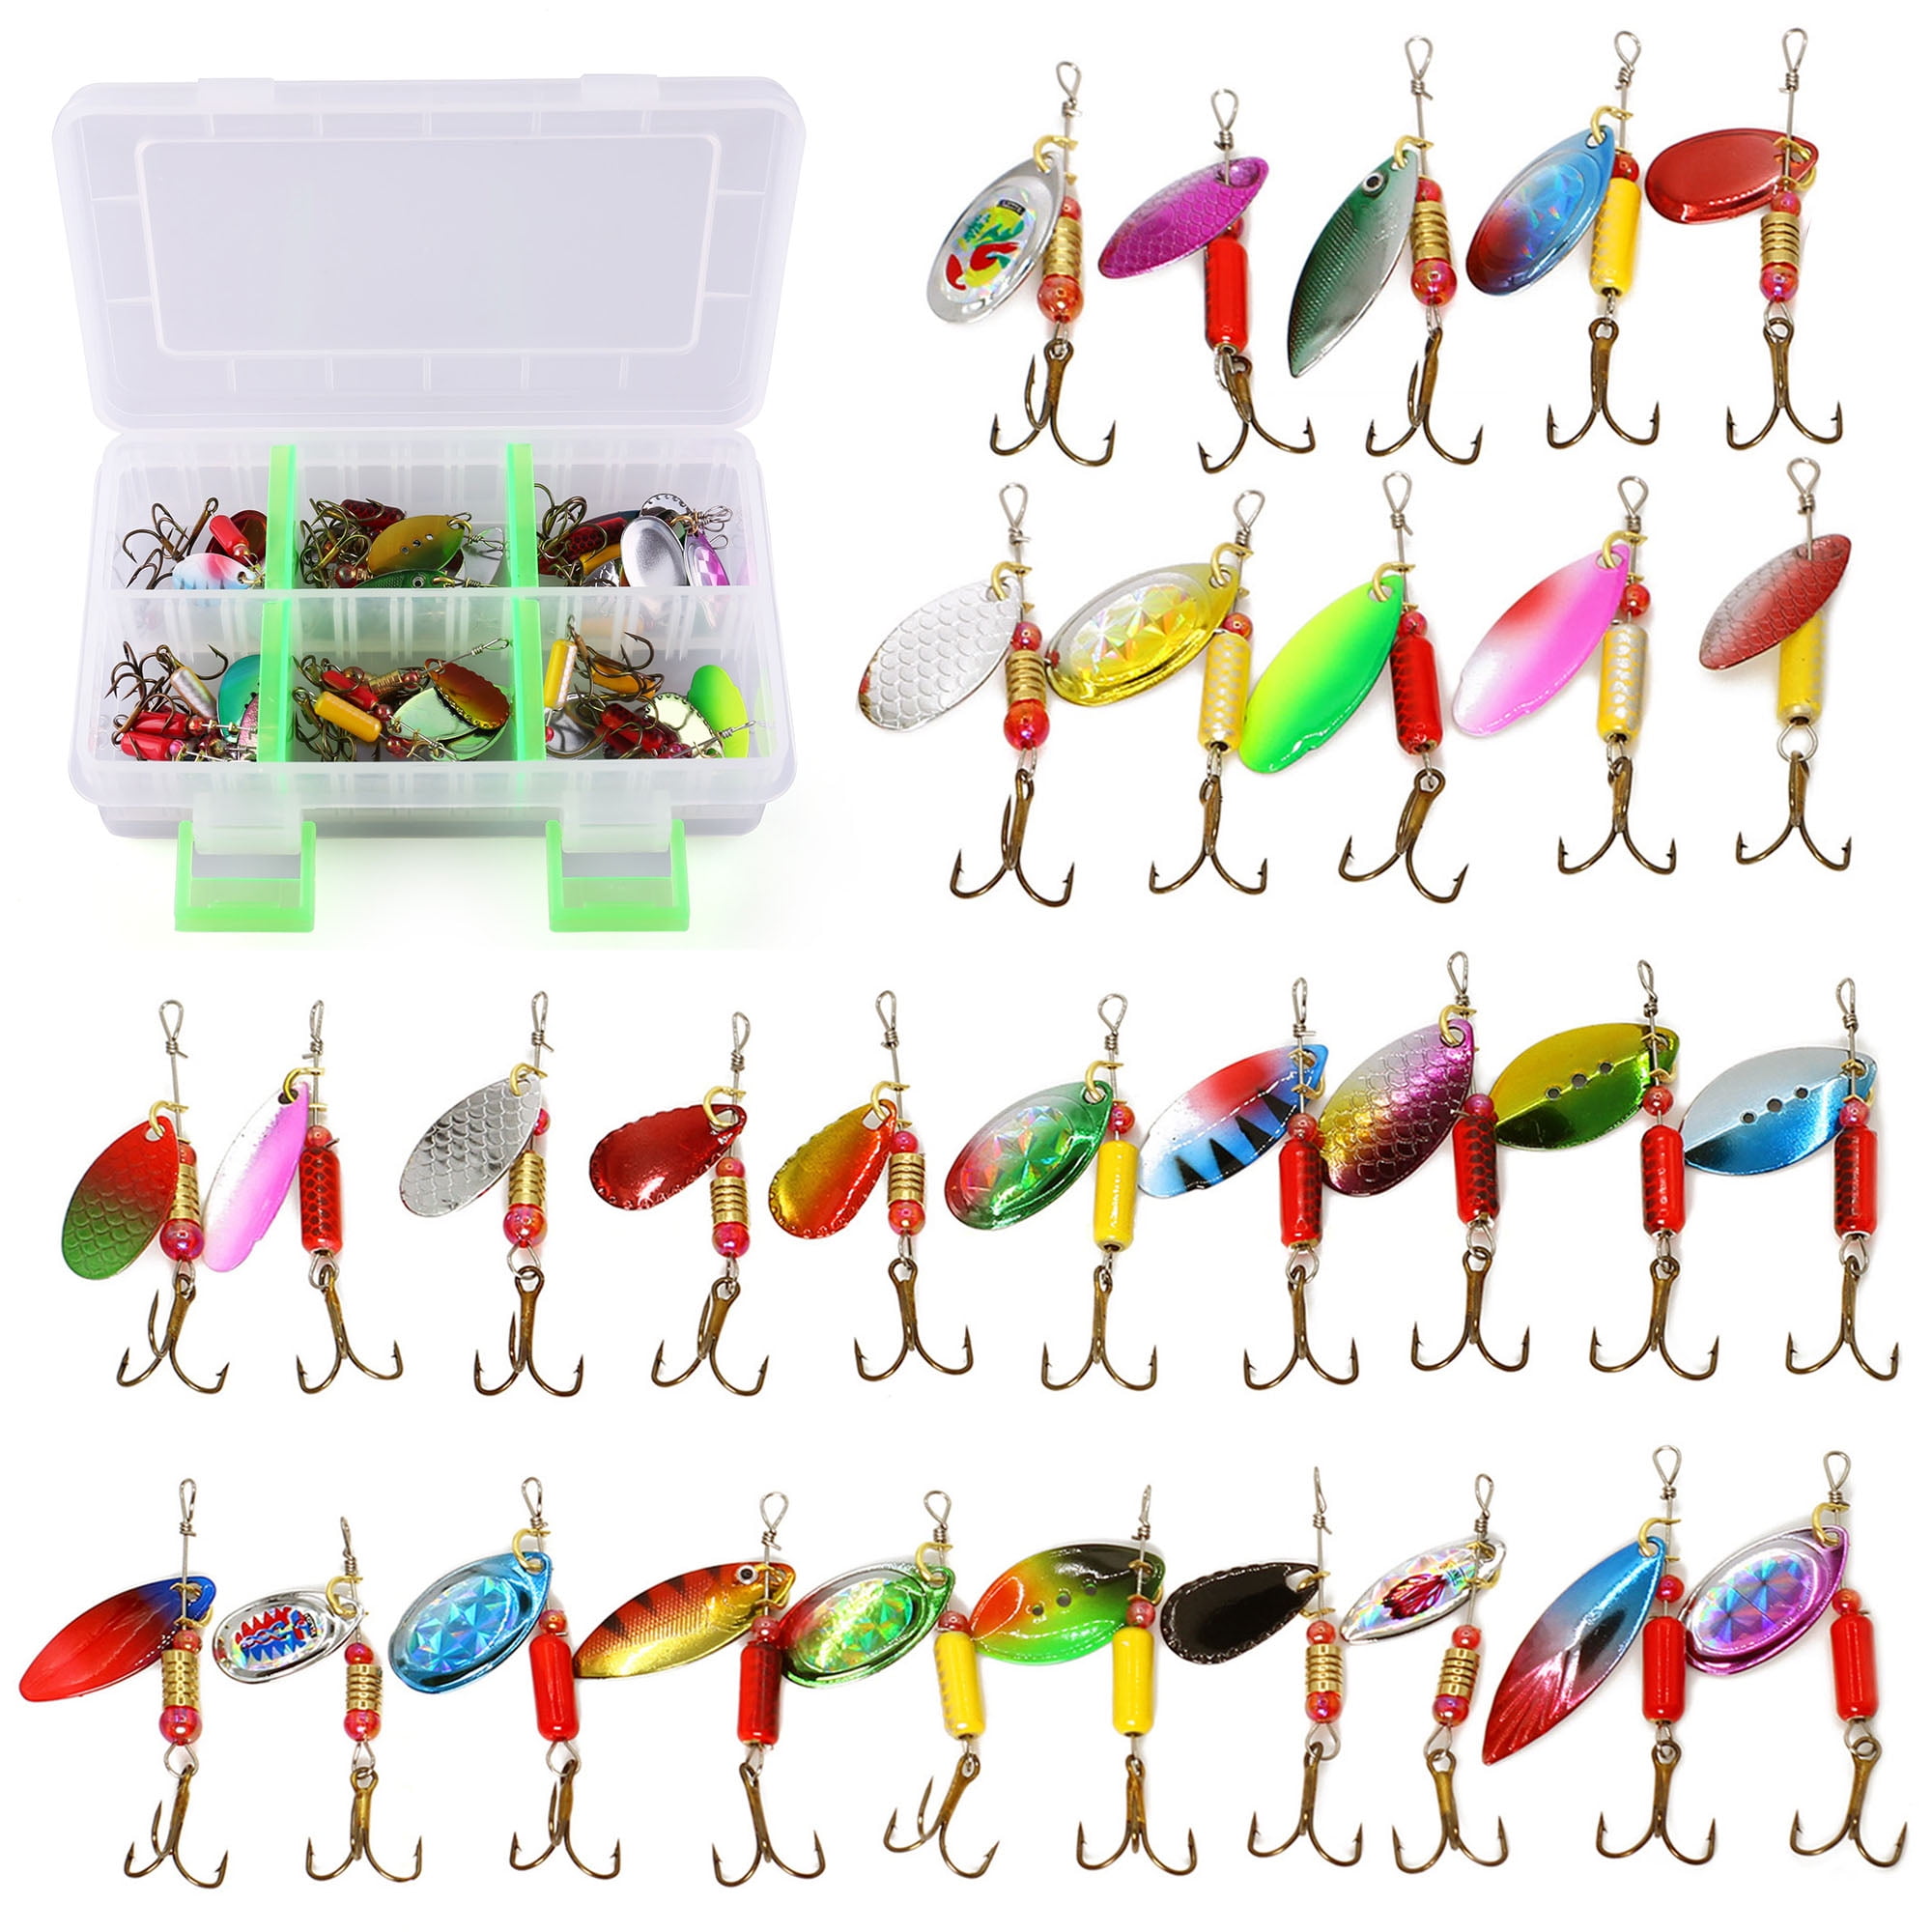 Fishing Lures 10pcs Spinner Lures Baits with Tackle Box, Bass Trout Salmon  Hard Metal Rooster Tail Fishing Lures Kit by FouceClaus